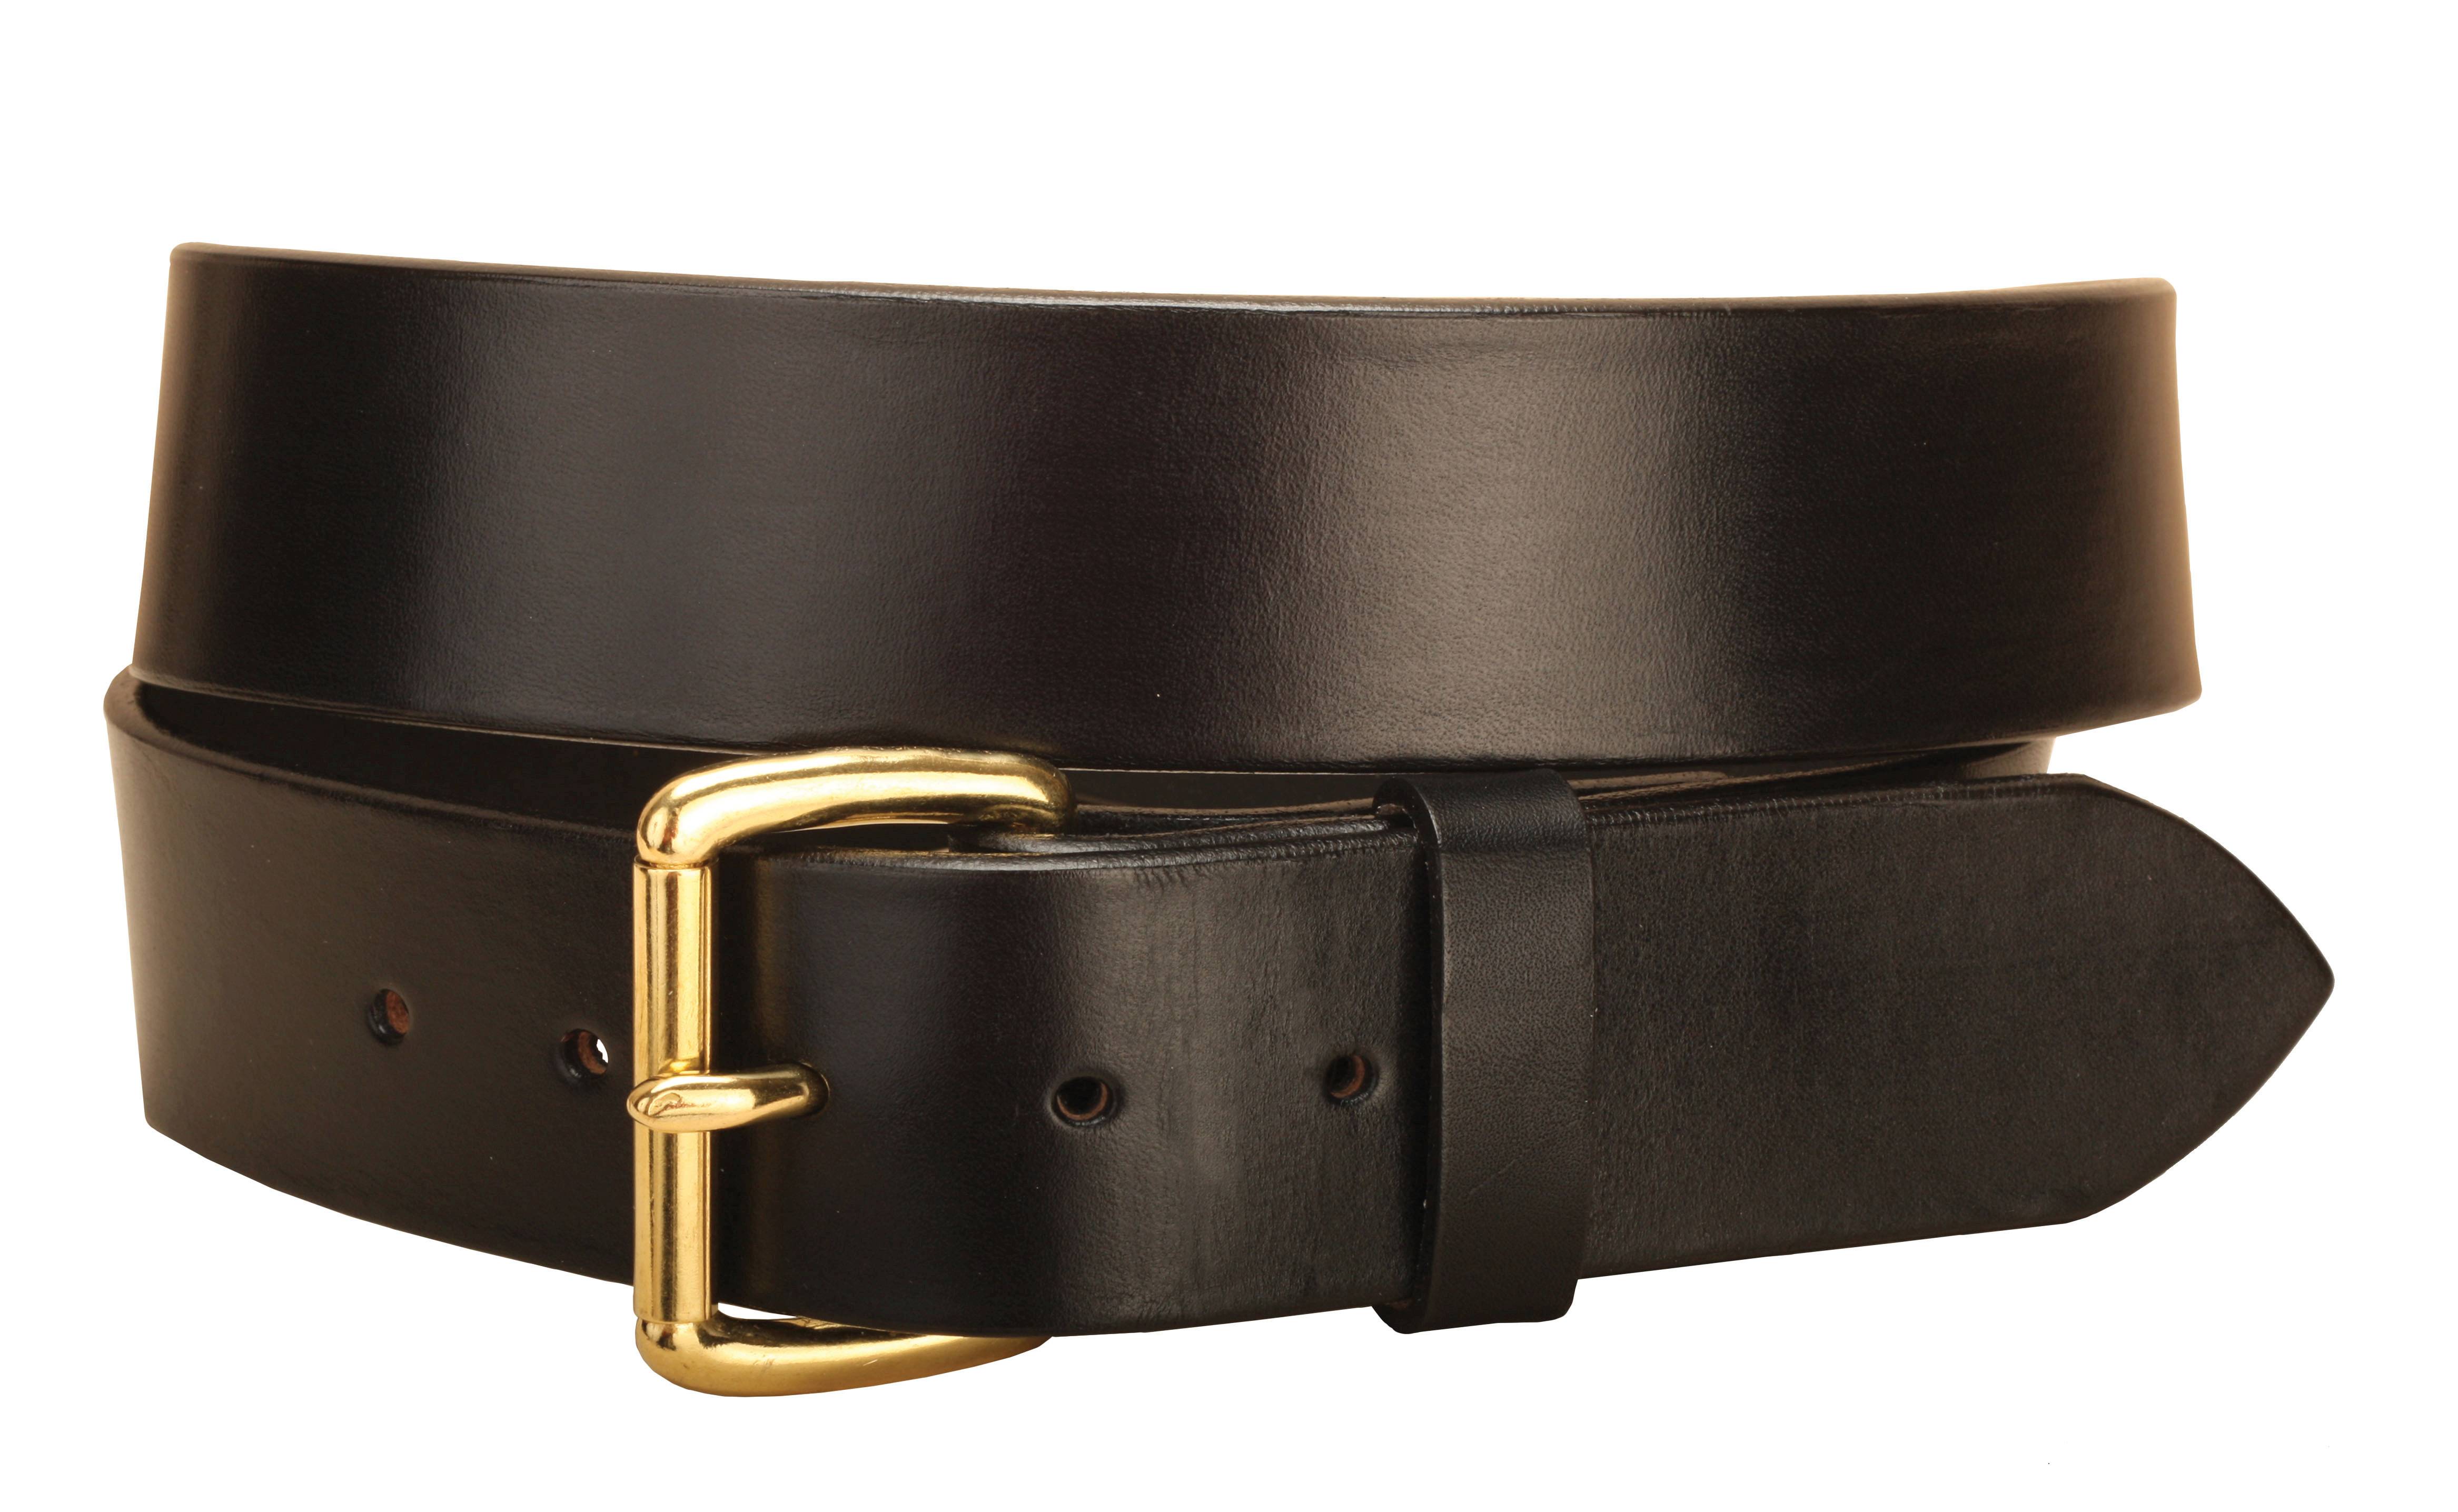 Tory Leather Anchor Buckle Strap Leather Belt